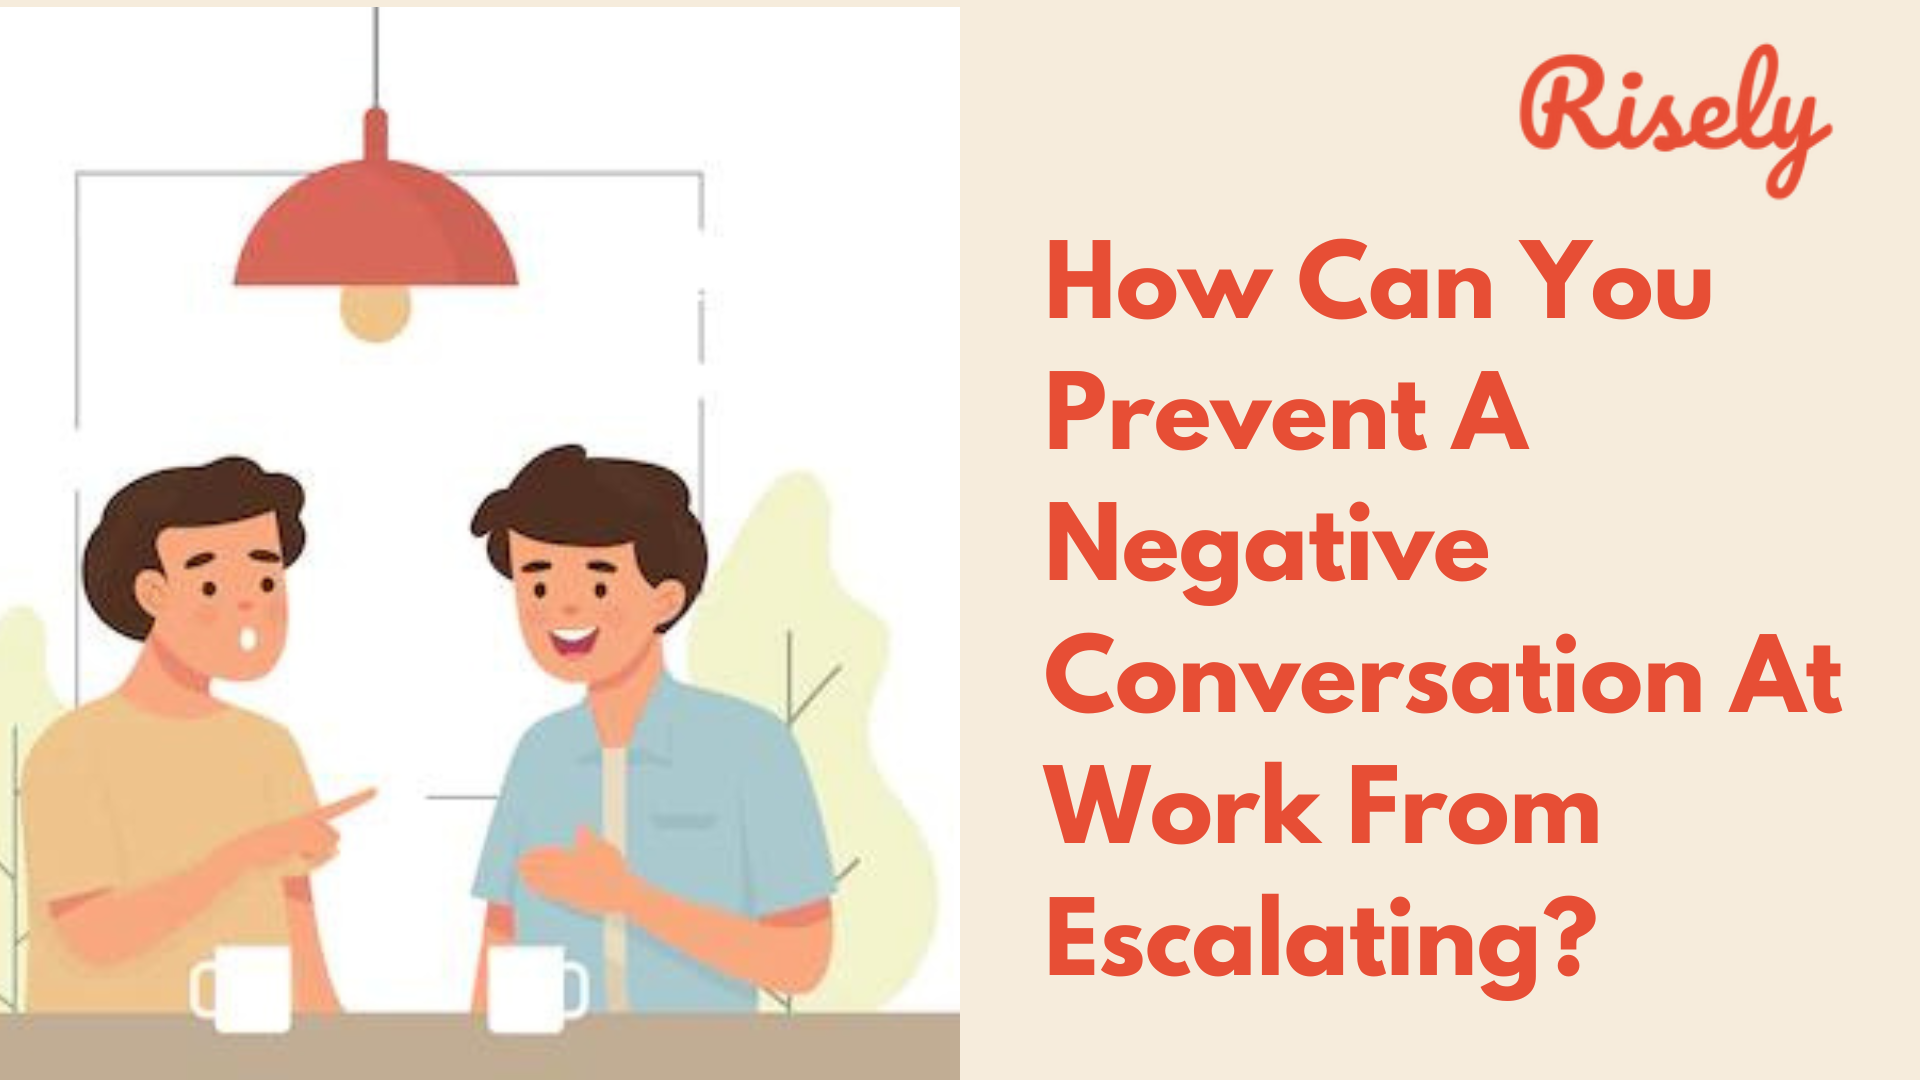 How Can You Prevent A Negative Conversation At Work From Escalating?